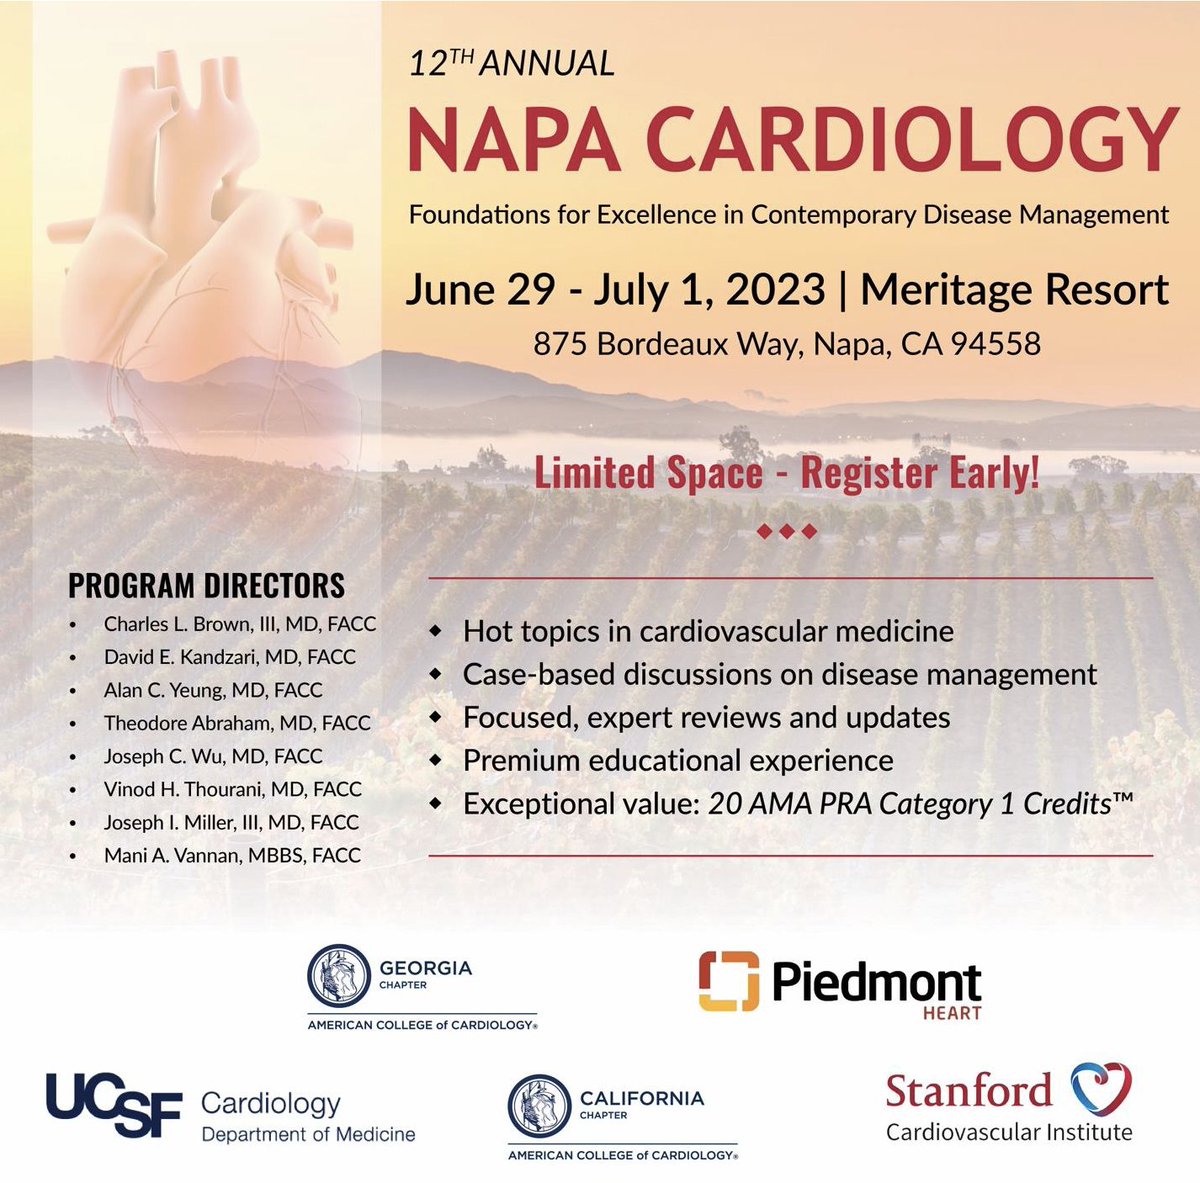 Next week, Thursday, June 29th - Saturday, July 1st, there will be a joint cardiology course in Napa at The Meritage Resort. We have 7 exceptional presenters from #UCSFCardiology. Use this link to register: napacardiology.accga.org @CaliforniaACC